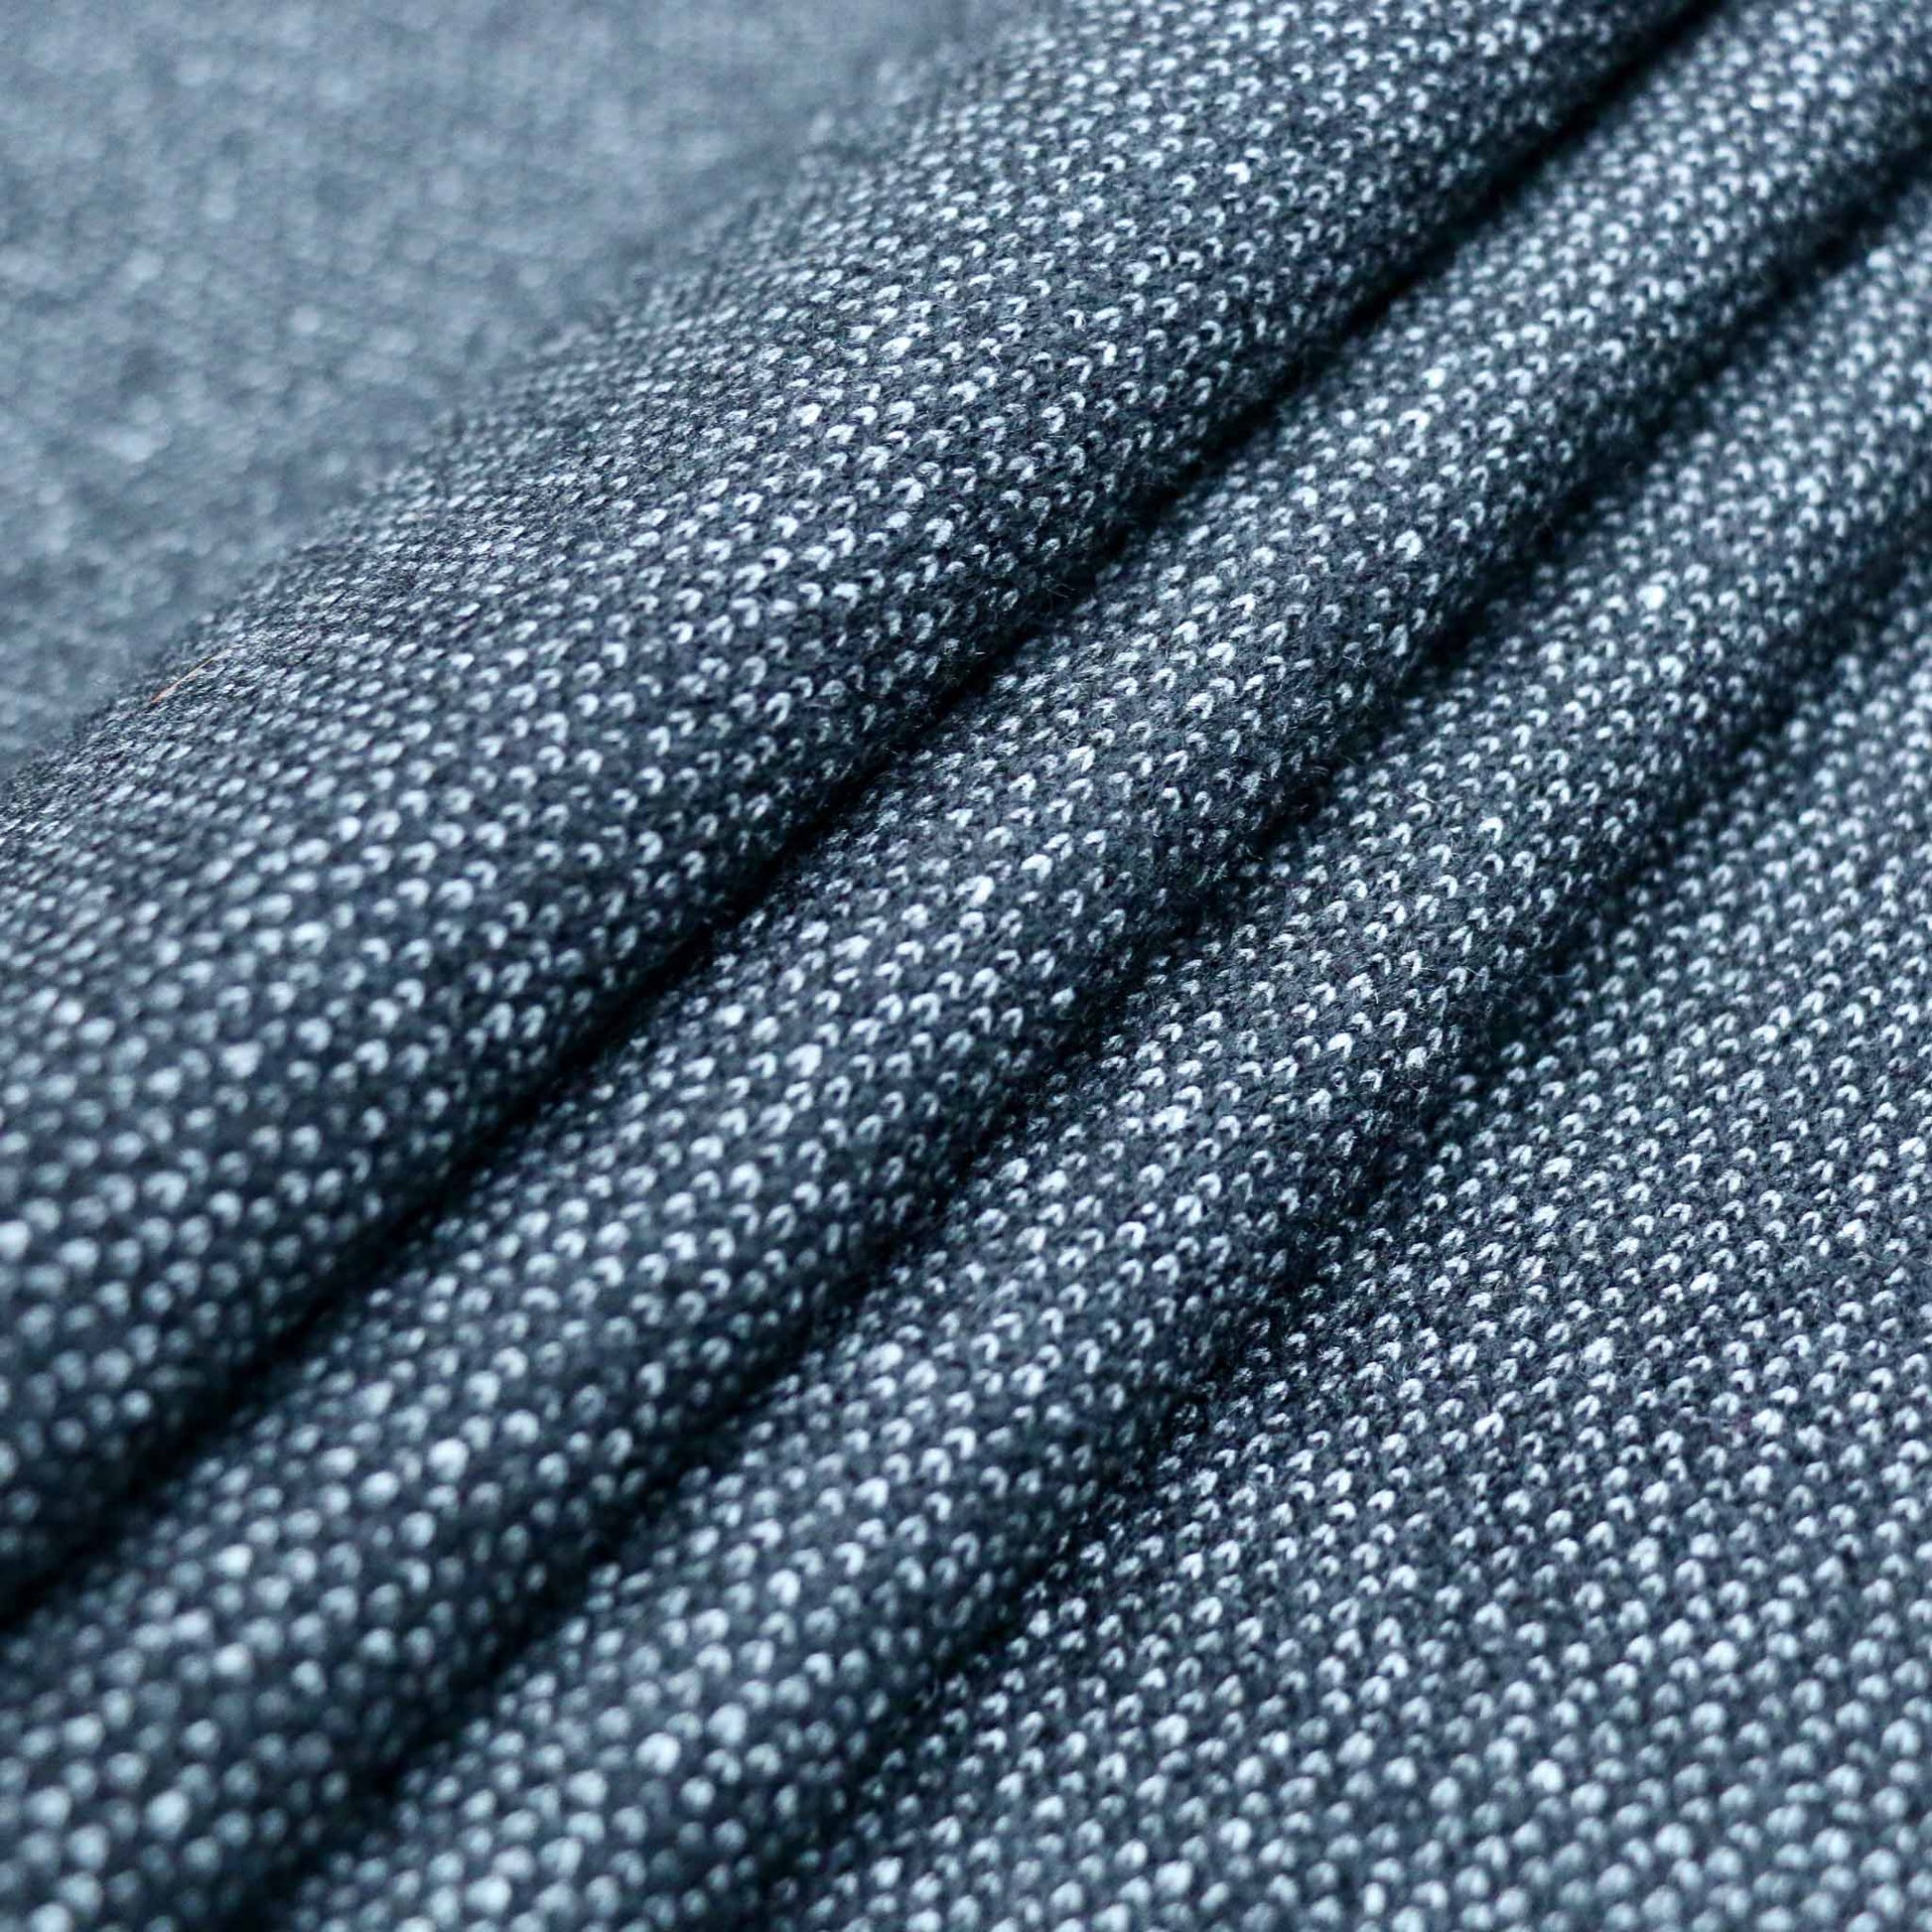 folded wool jersey knit dressmaking fabric with felt backing in black and grey